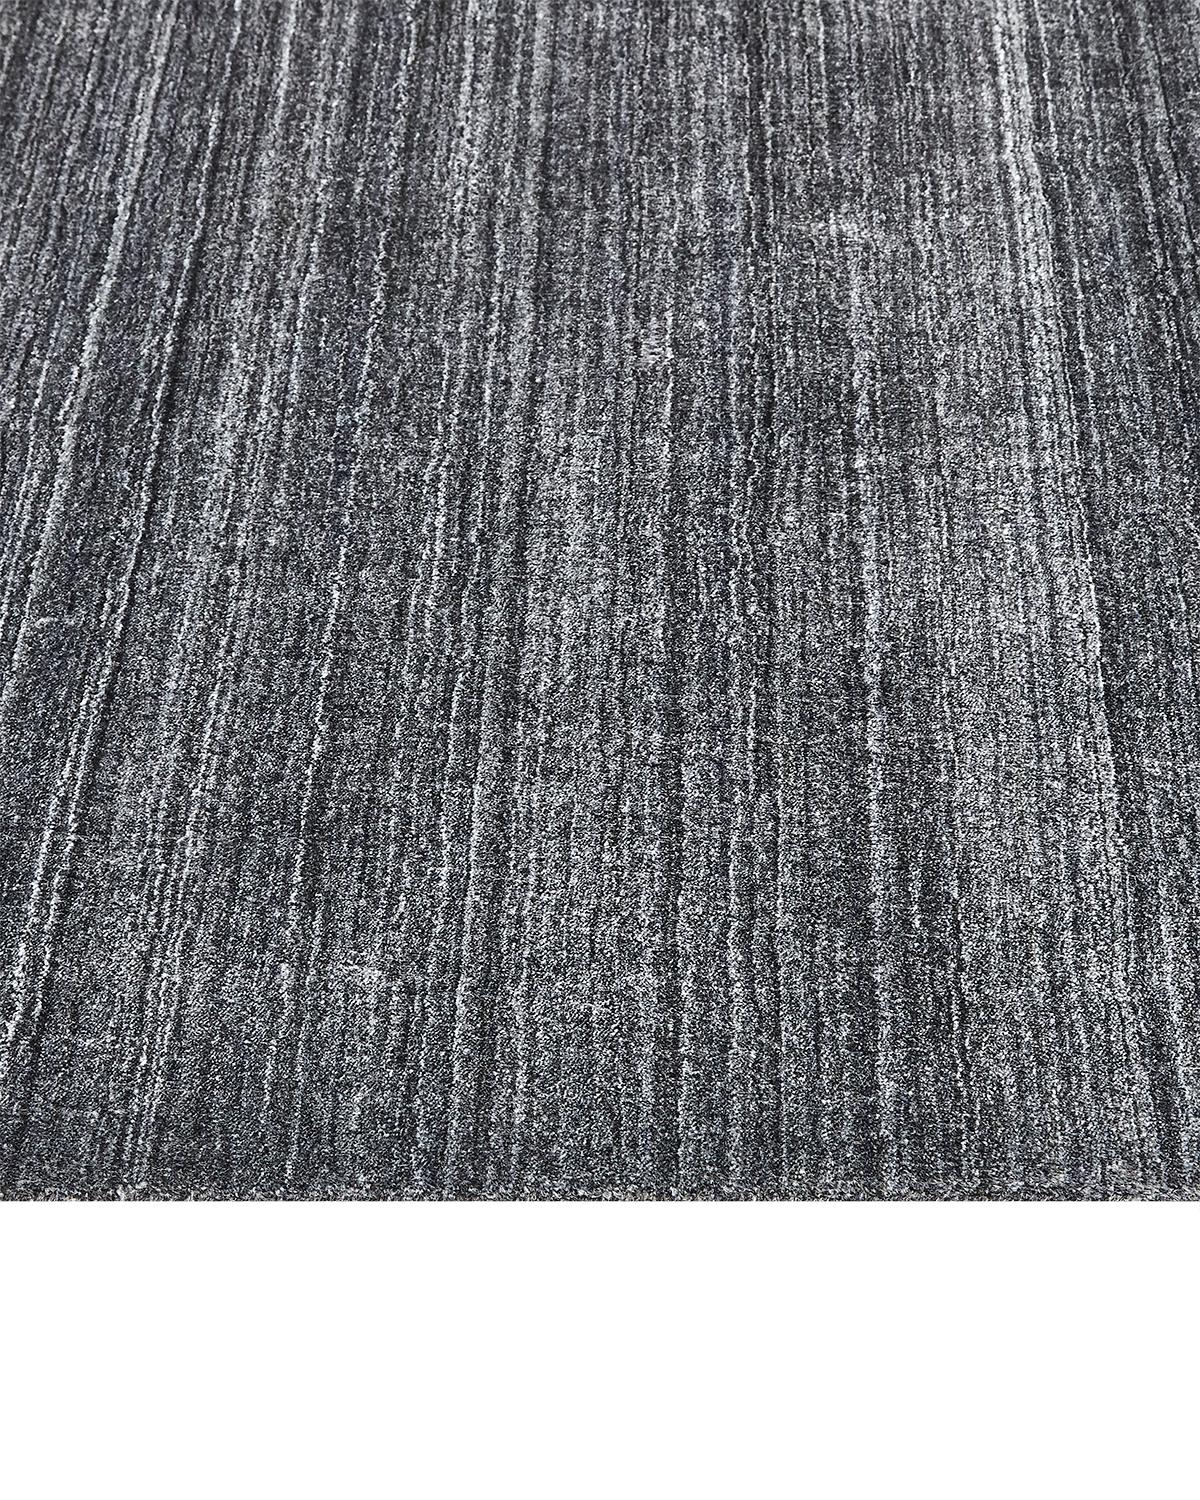 Solo Rugs Solid Modern Hand Loomed Dark Gray Area Rug In New Condition For Sale In Norwalk, CT